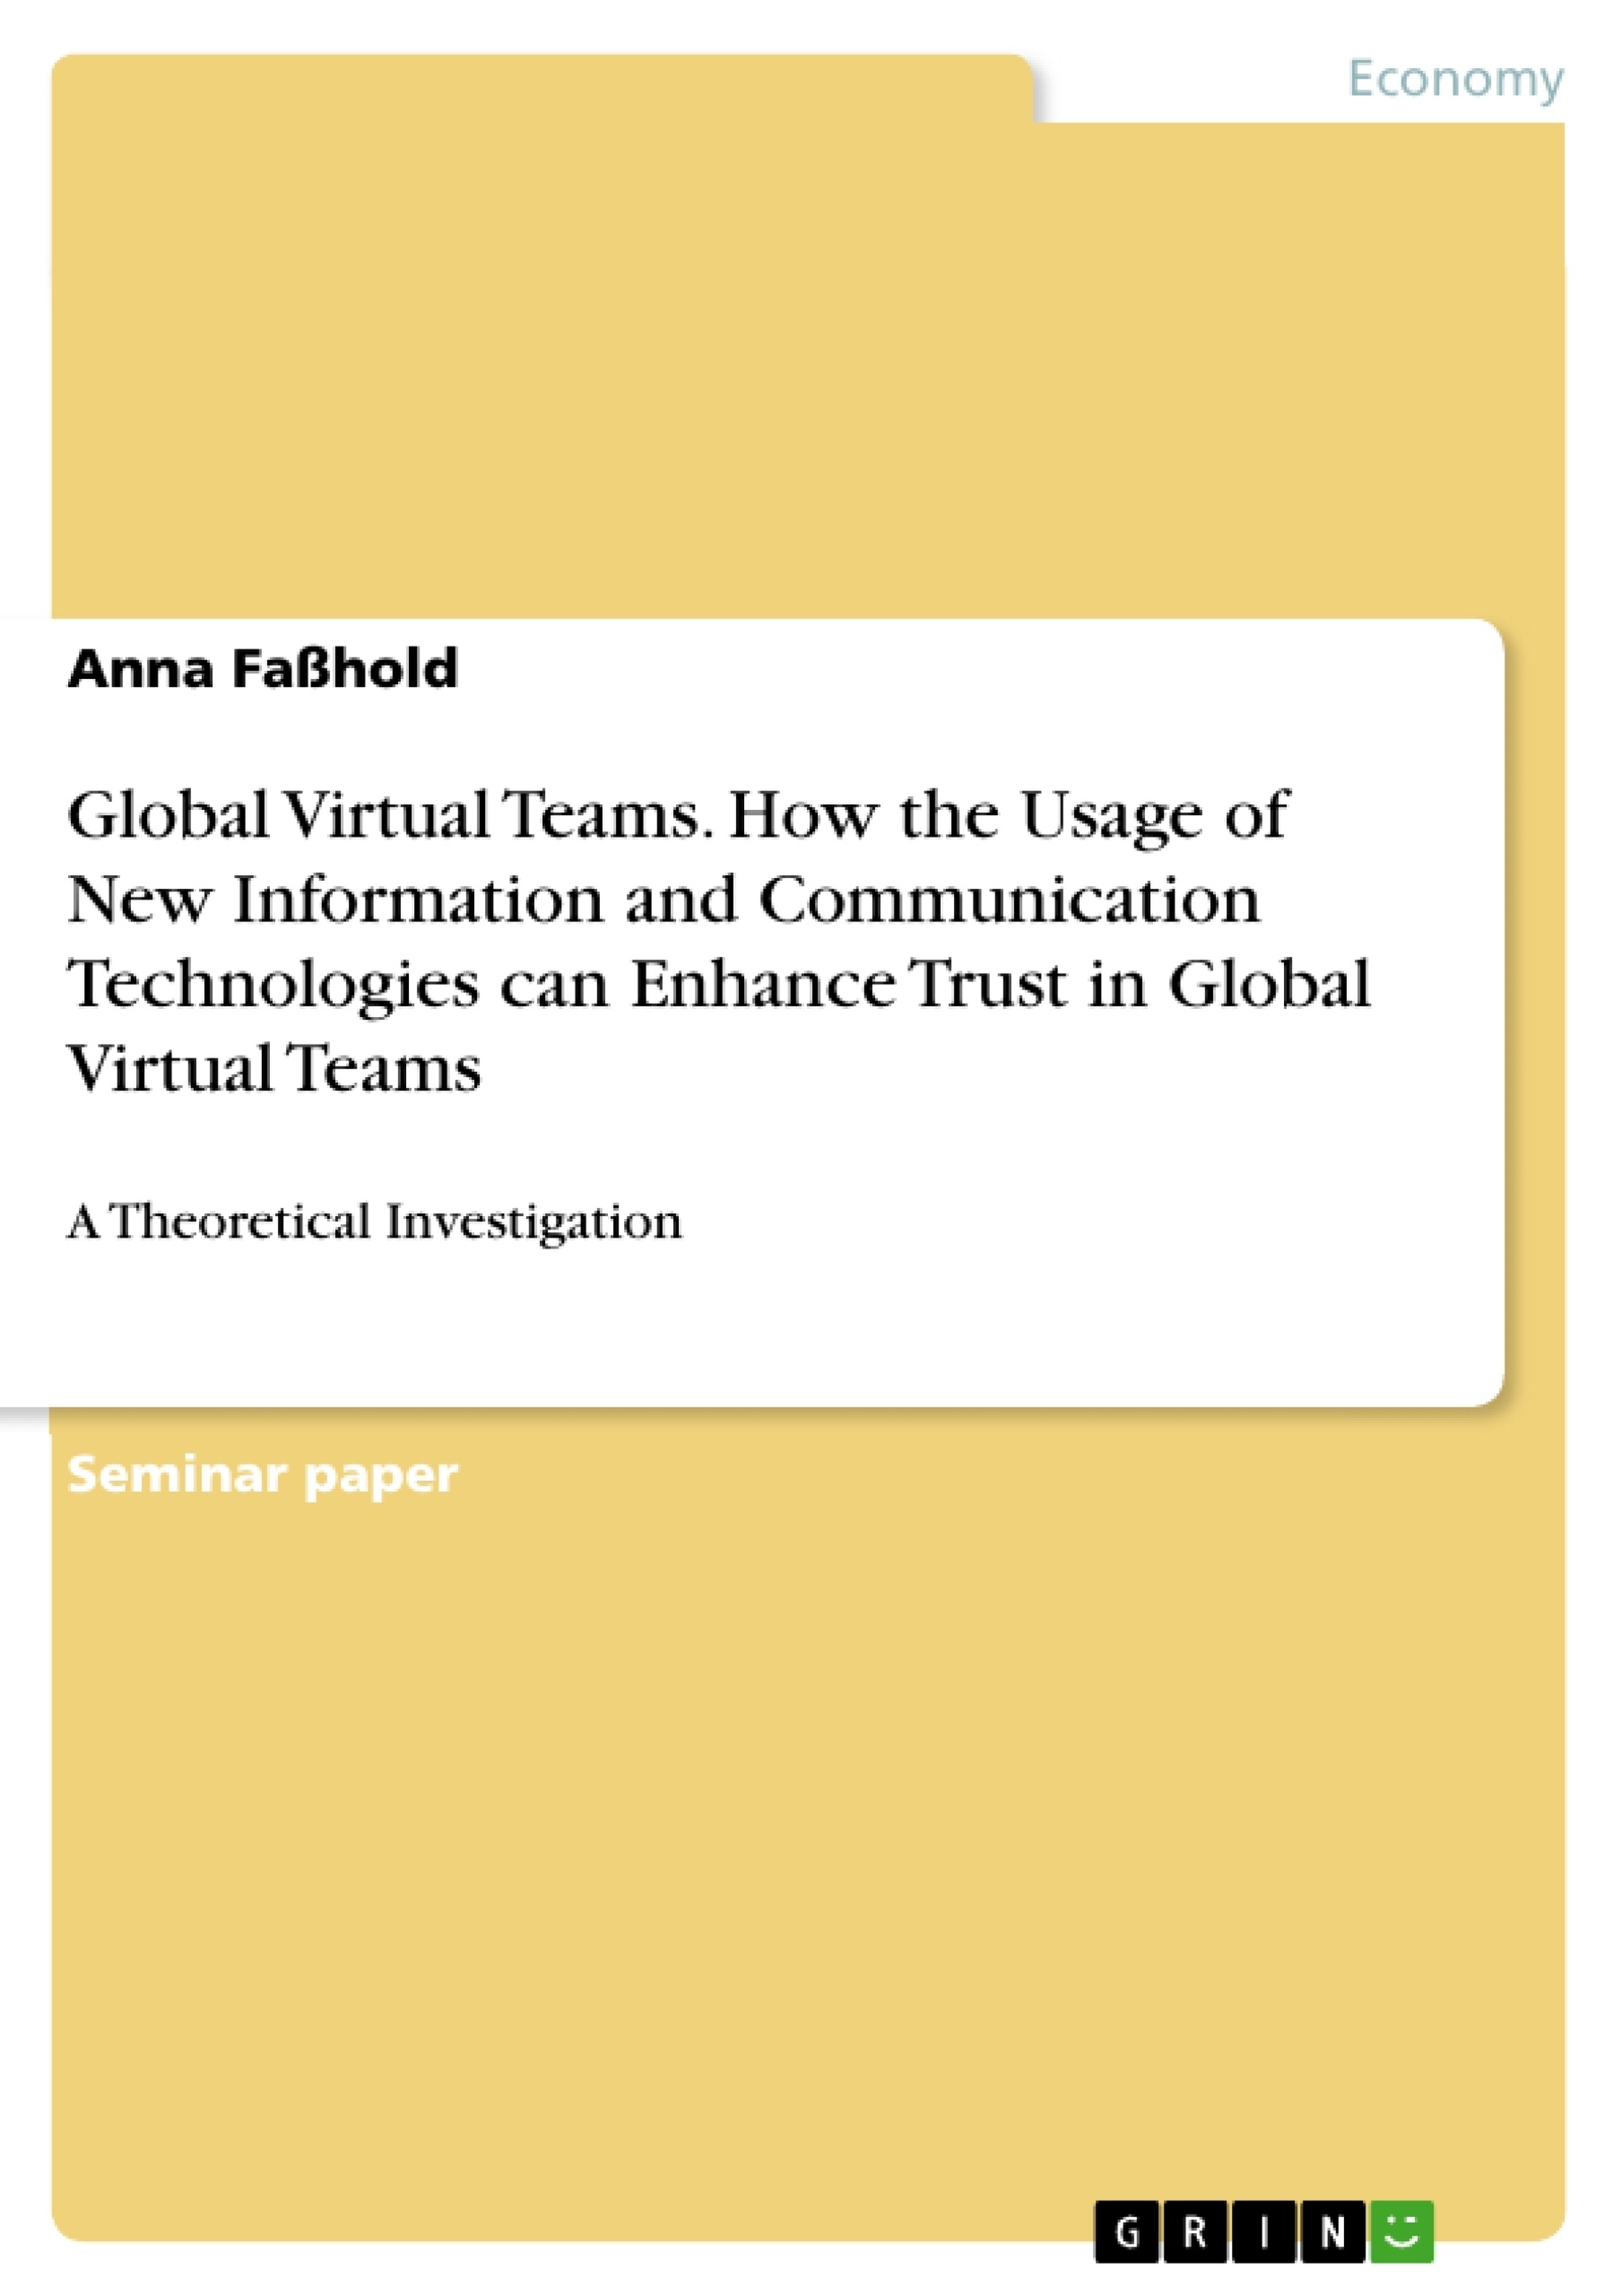 Title: Global Virtual Teams. How the Usage of New Information and Communication Technologies can Enhance Trust in Global Virtual Teams